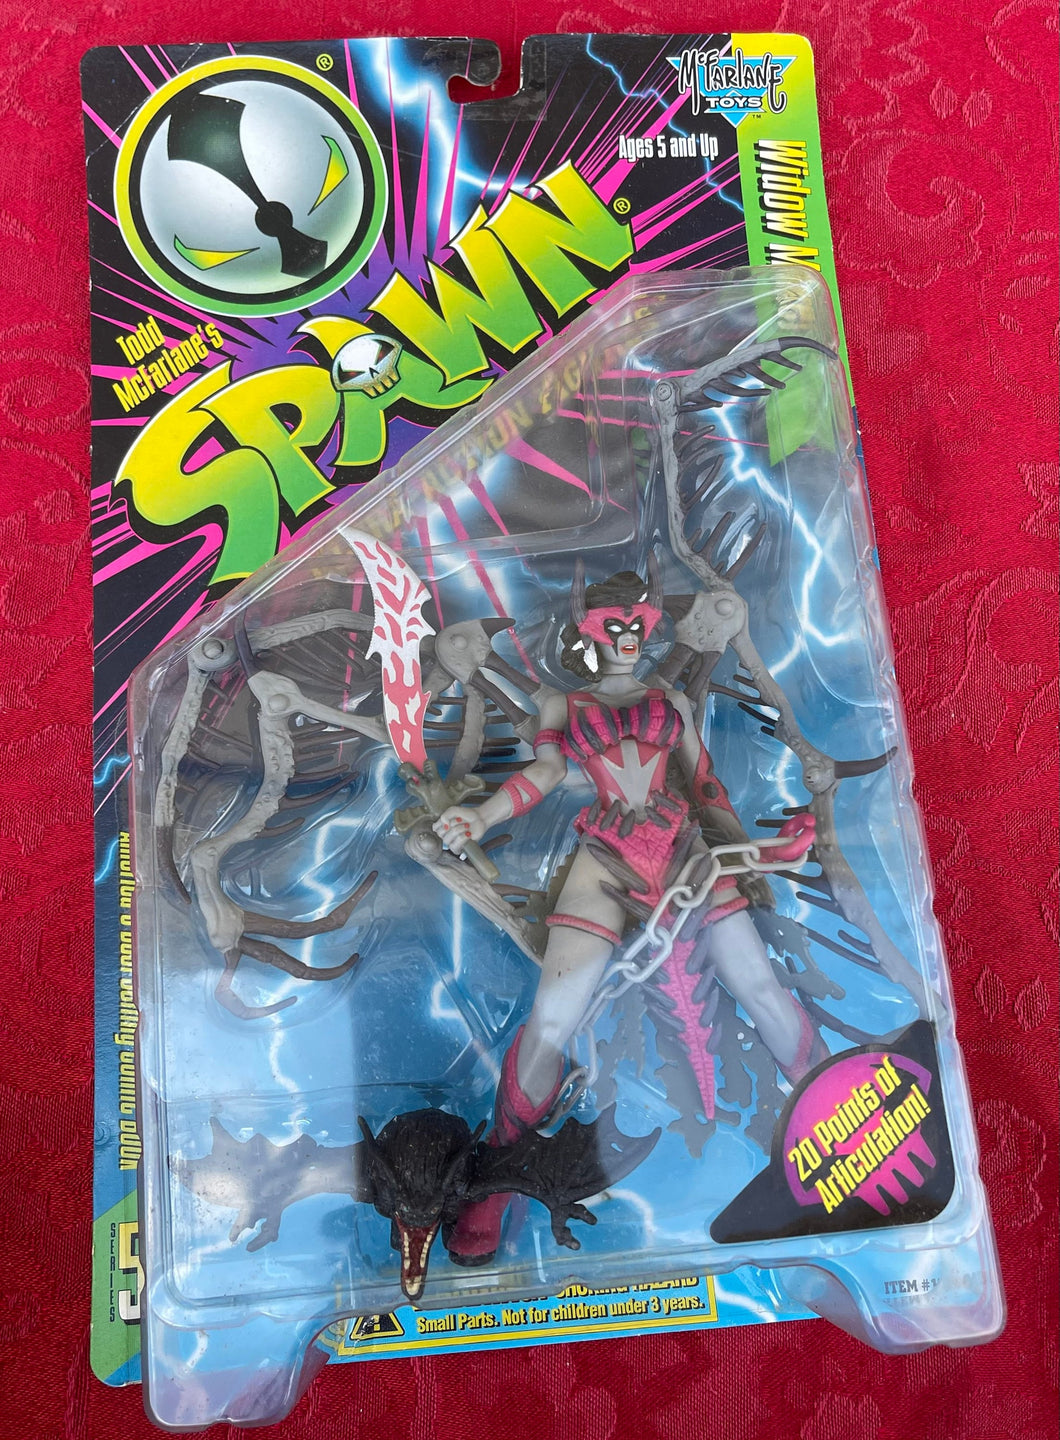 McFarlane Toys Spawn WIDOW MAKER Ultra-Action Figure 1996 Series 5 UNOPENED